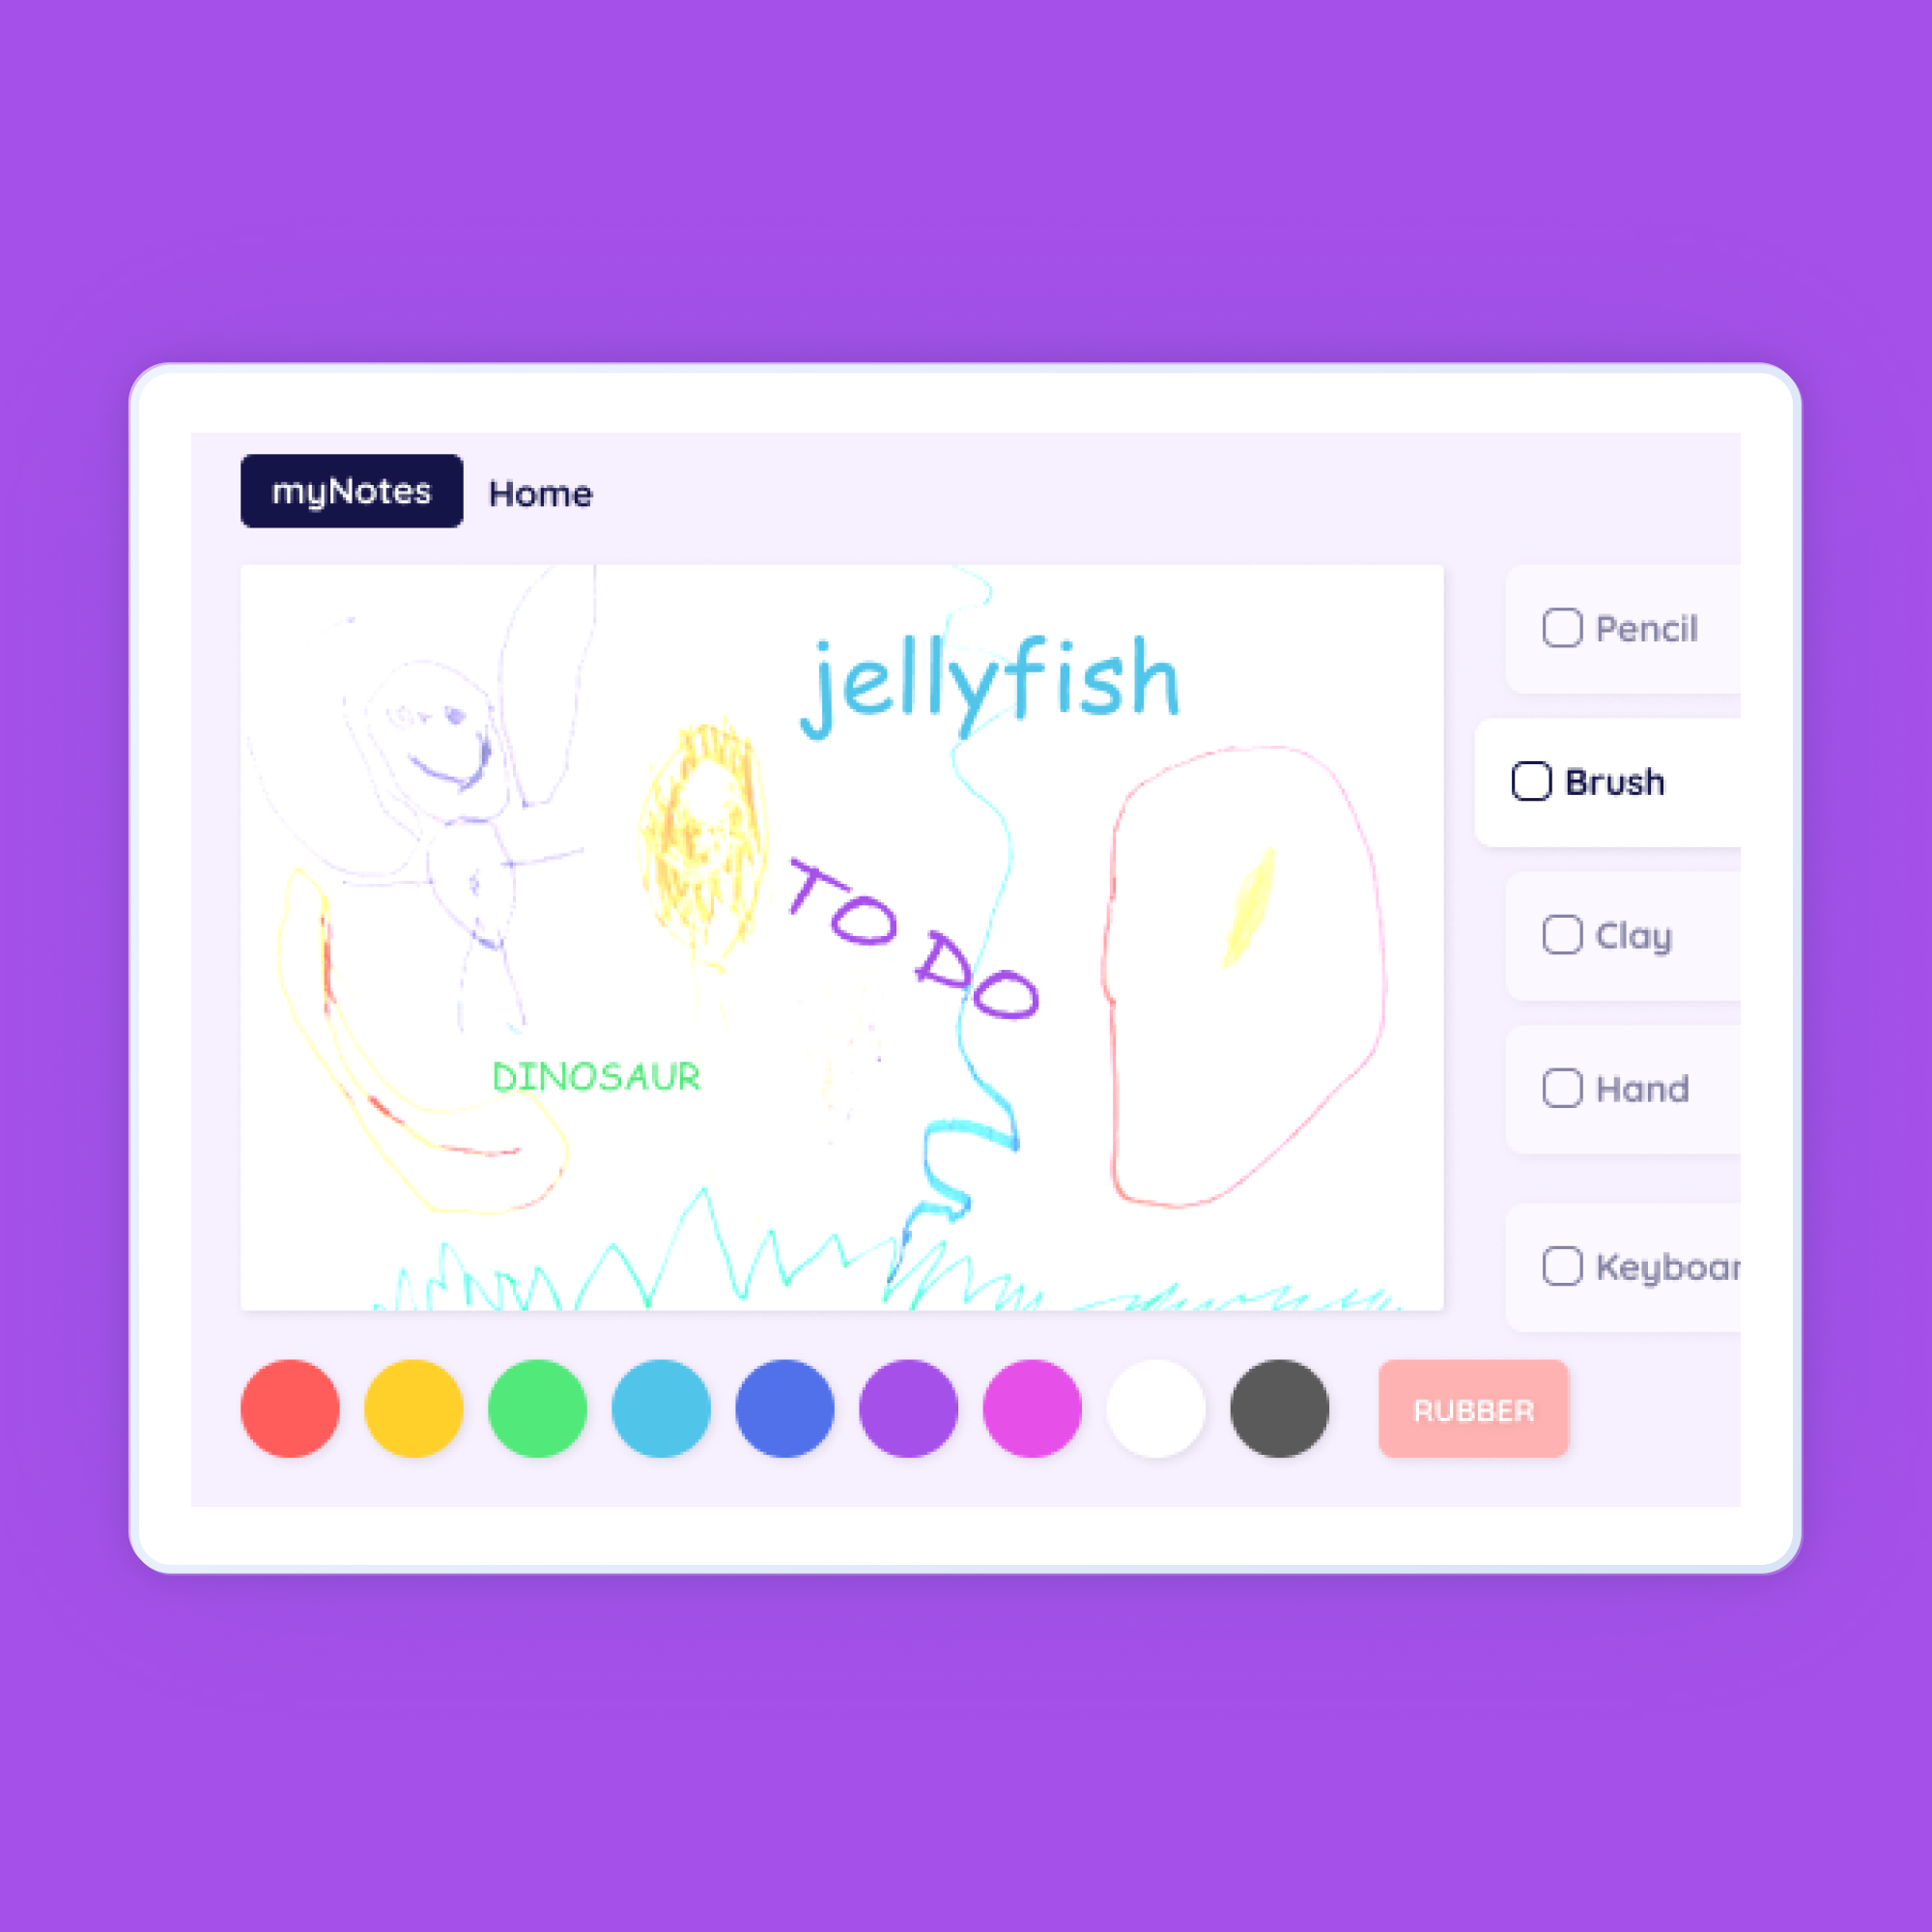 An image of a notes app made for toddlers